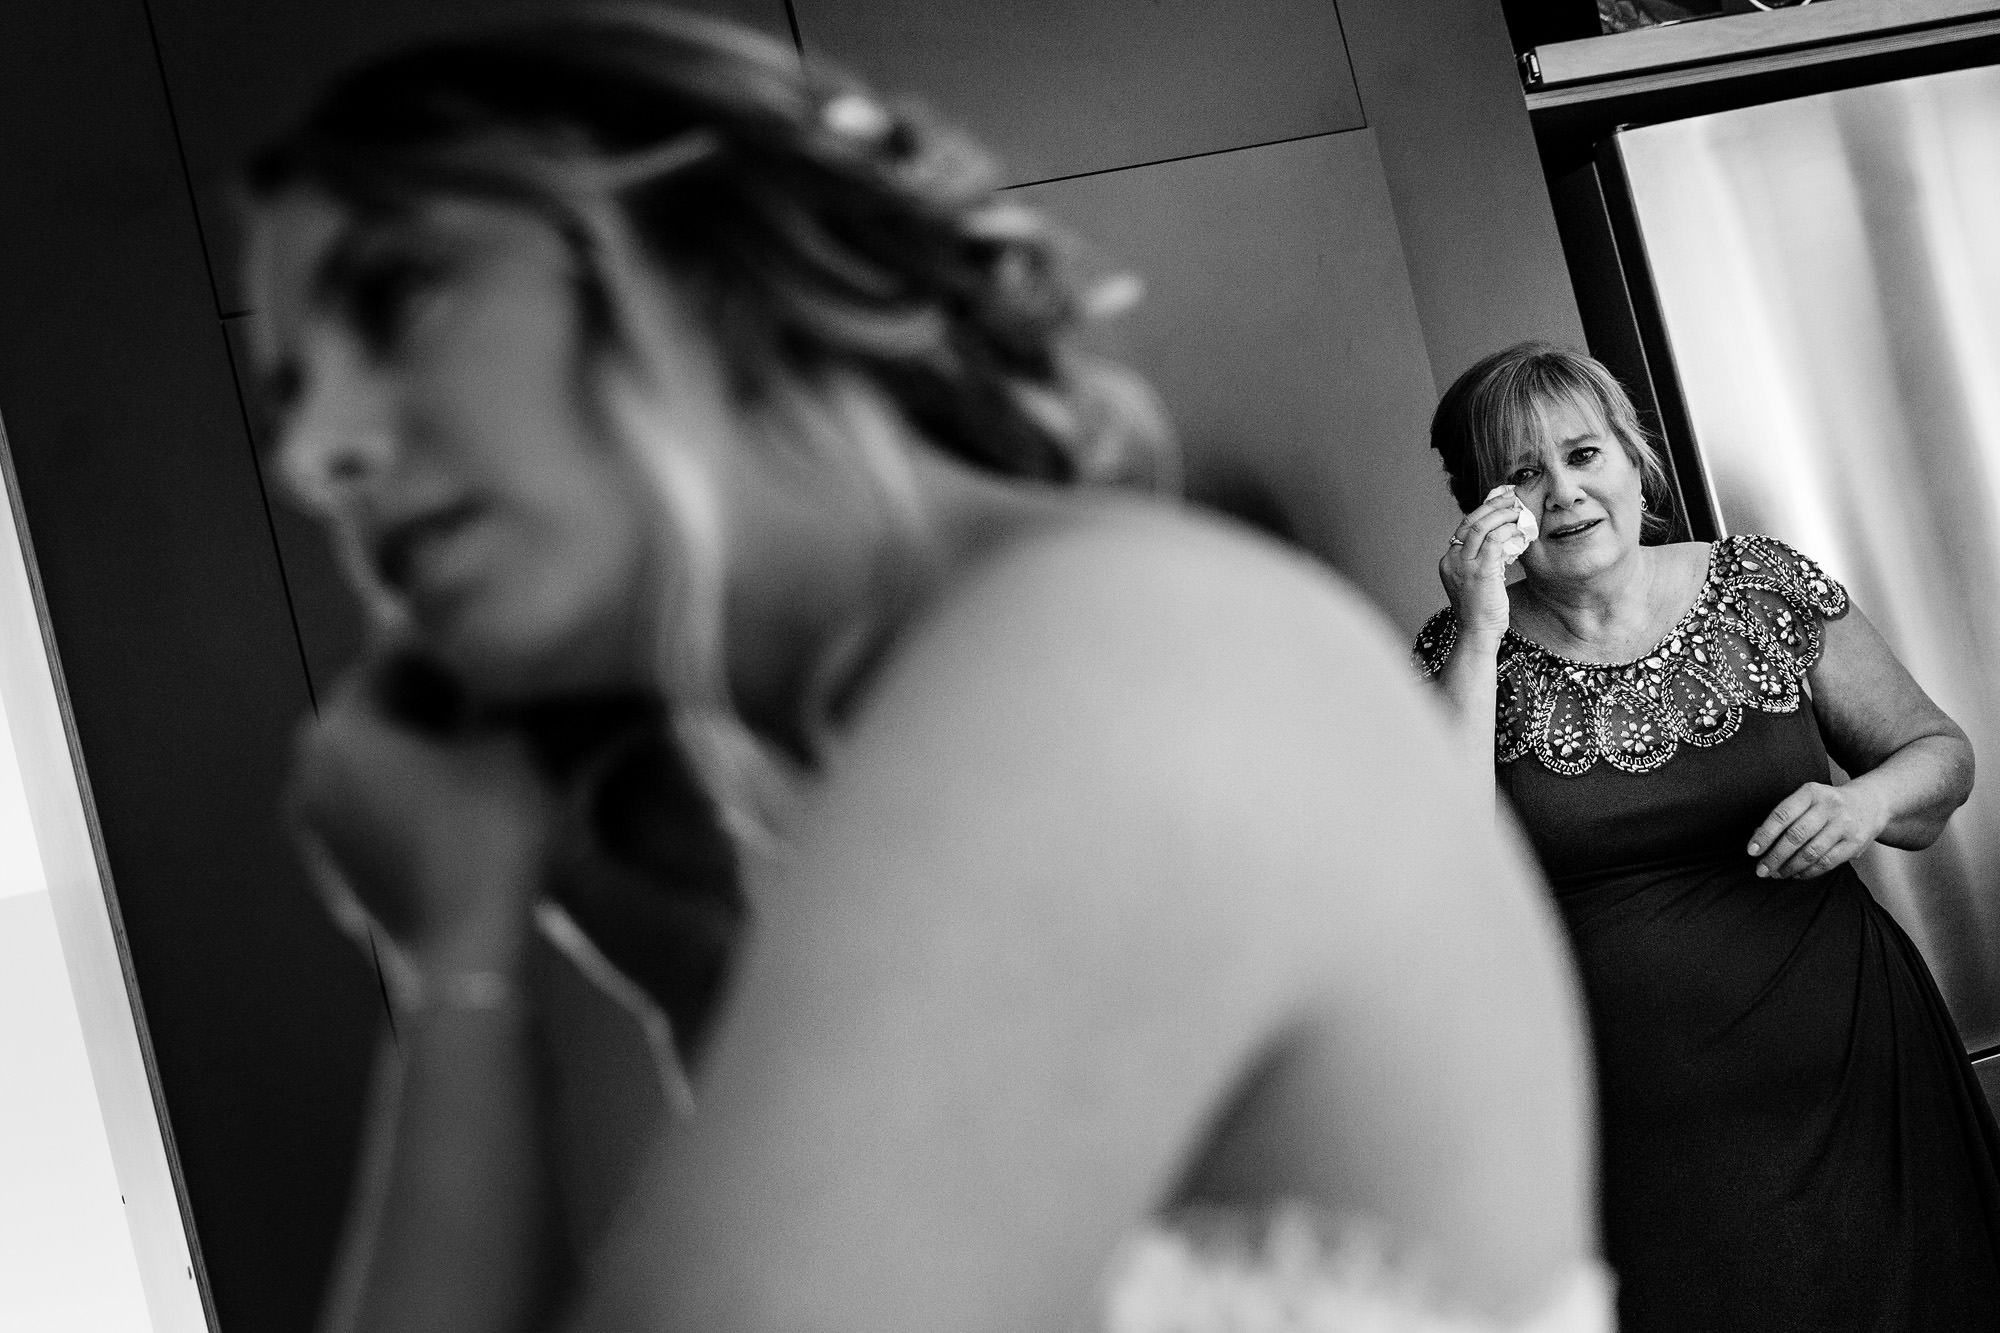 The mother of the bride cries while the bride finishes getting dressed on her wedding day.